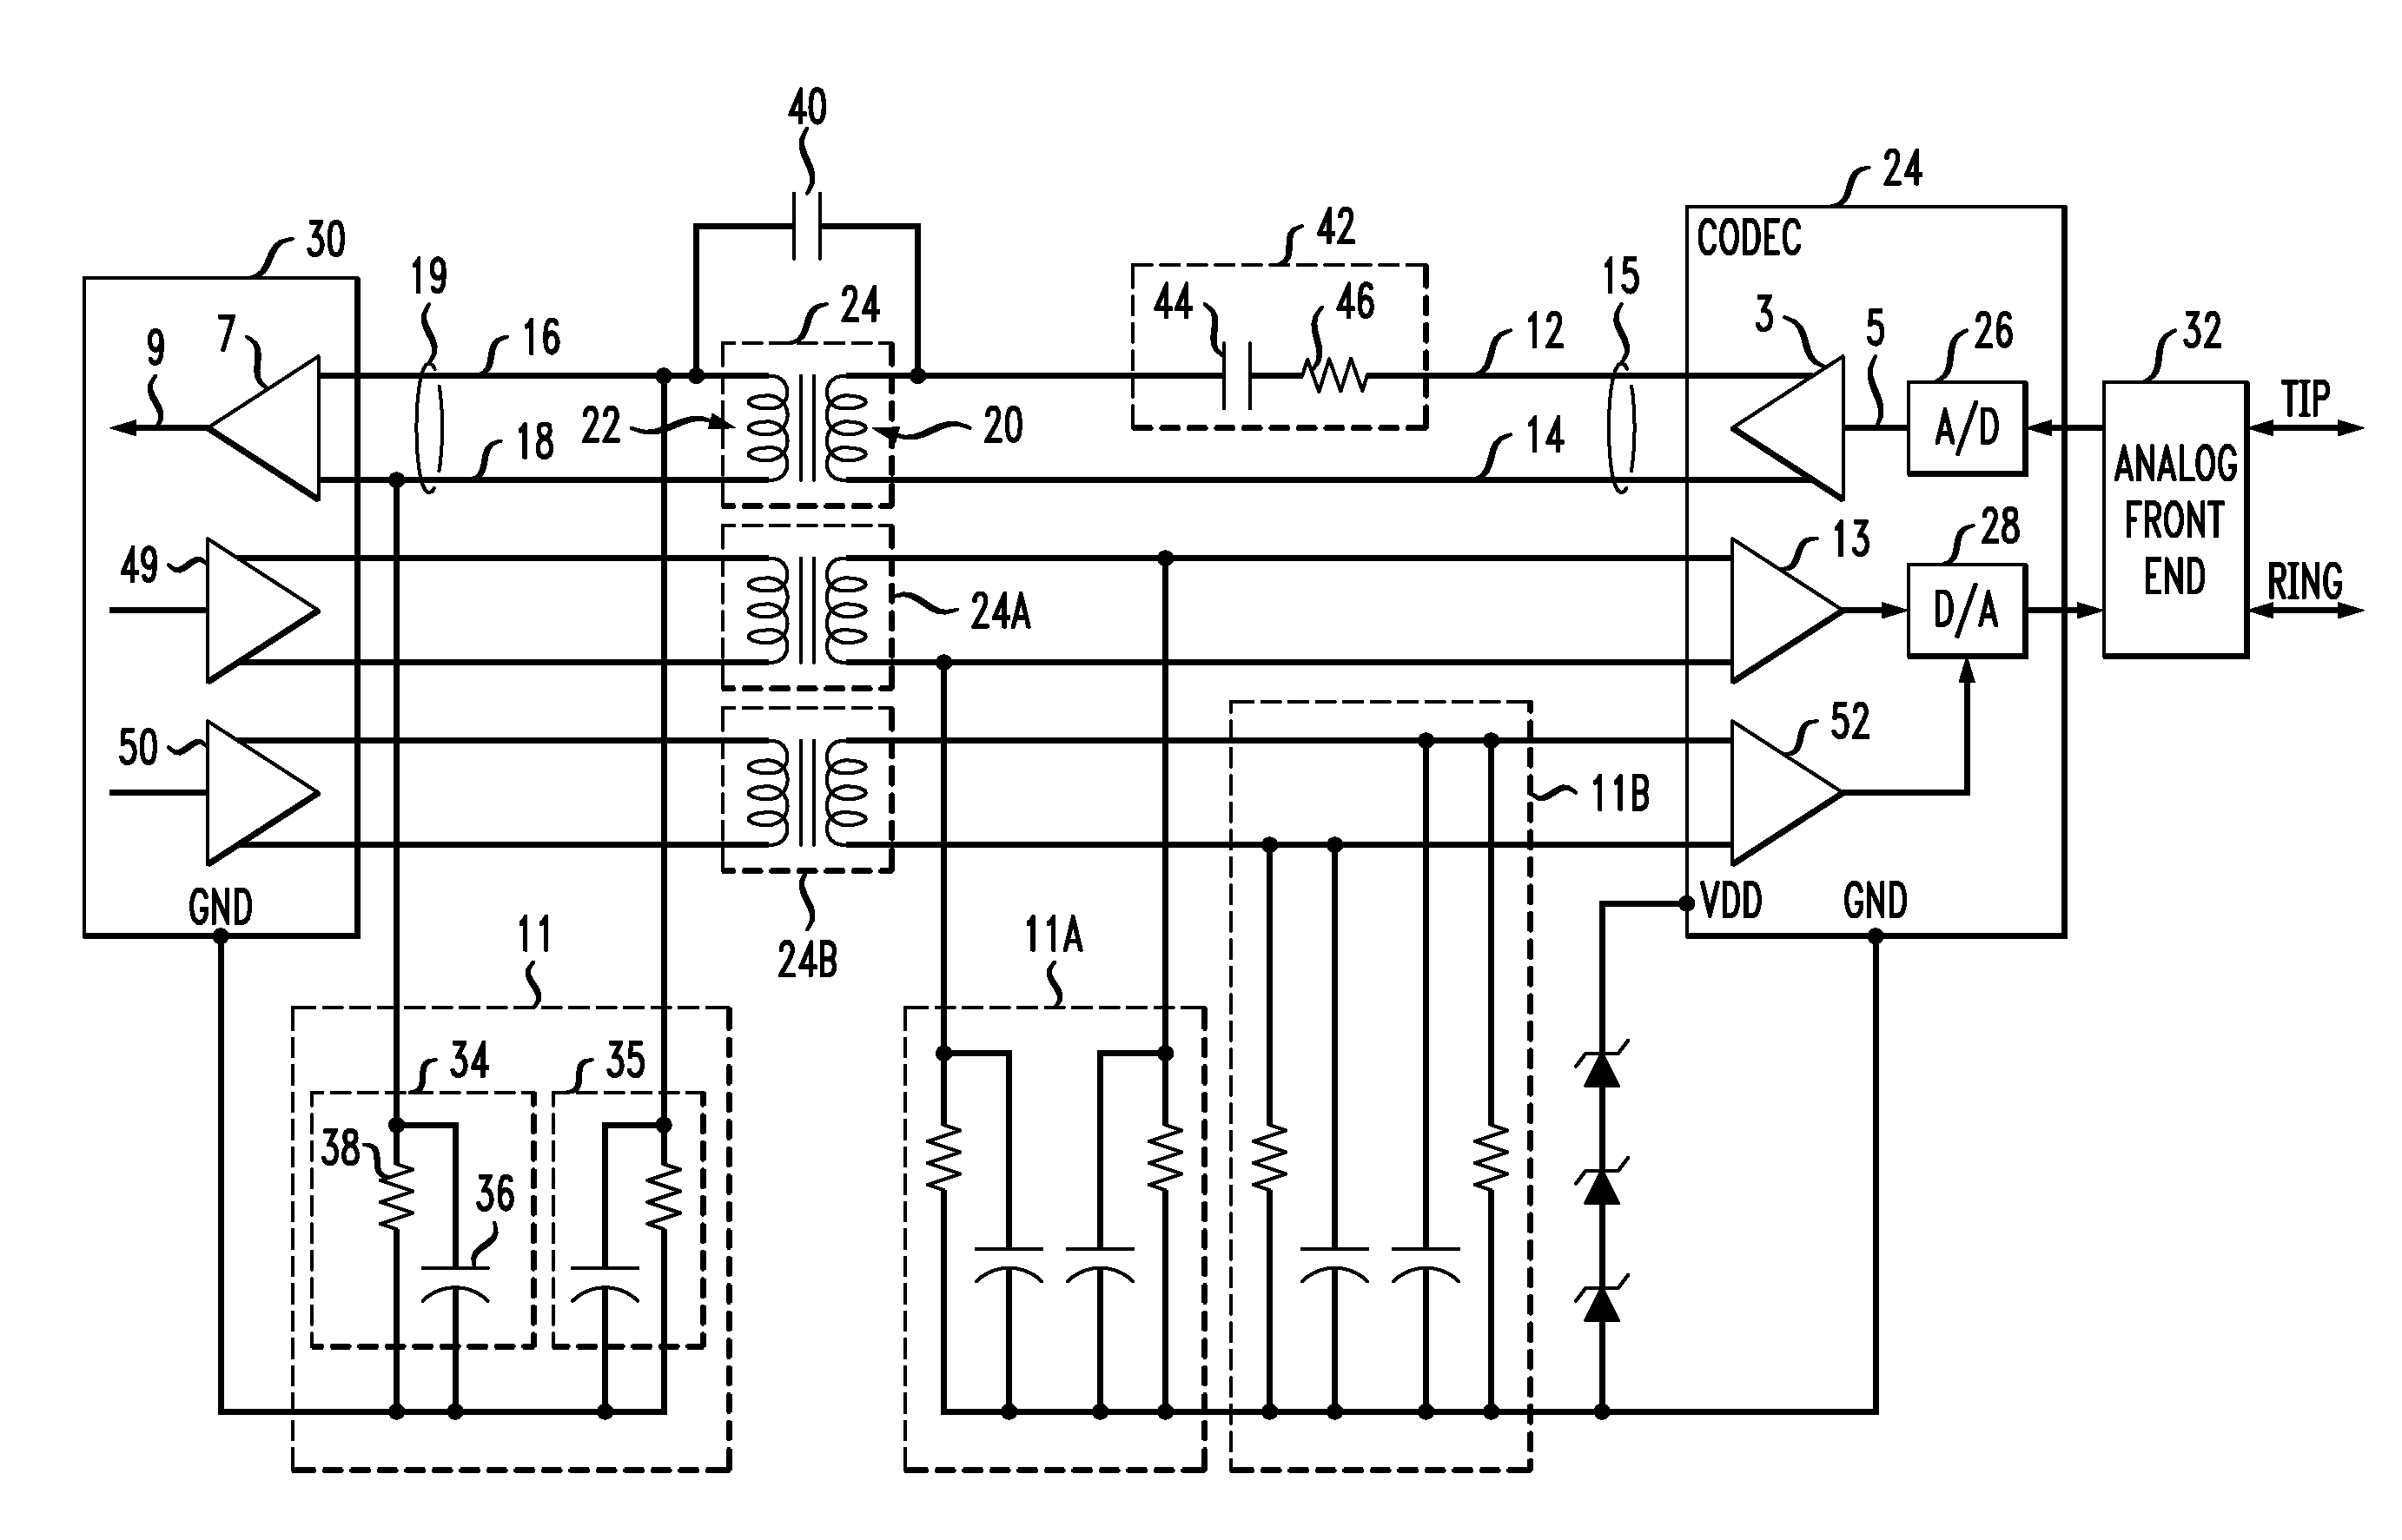 Inductive coupling for communications equipment interface circuitry